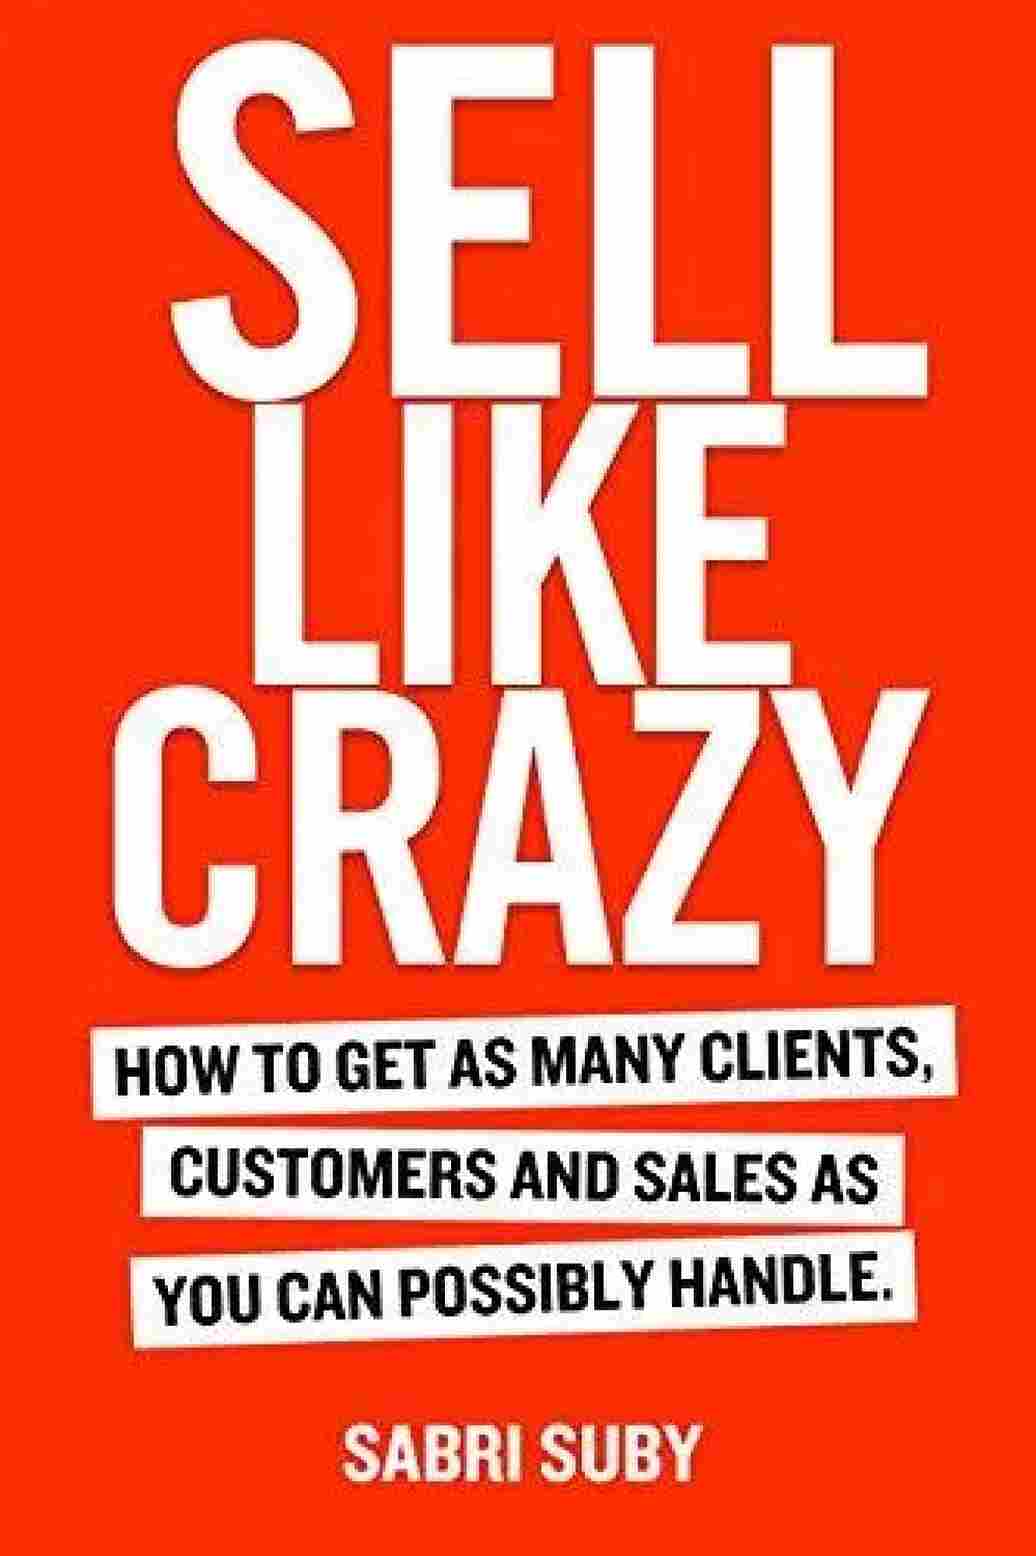 SELL LIKE CRAZY by  - Sabri Suby